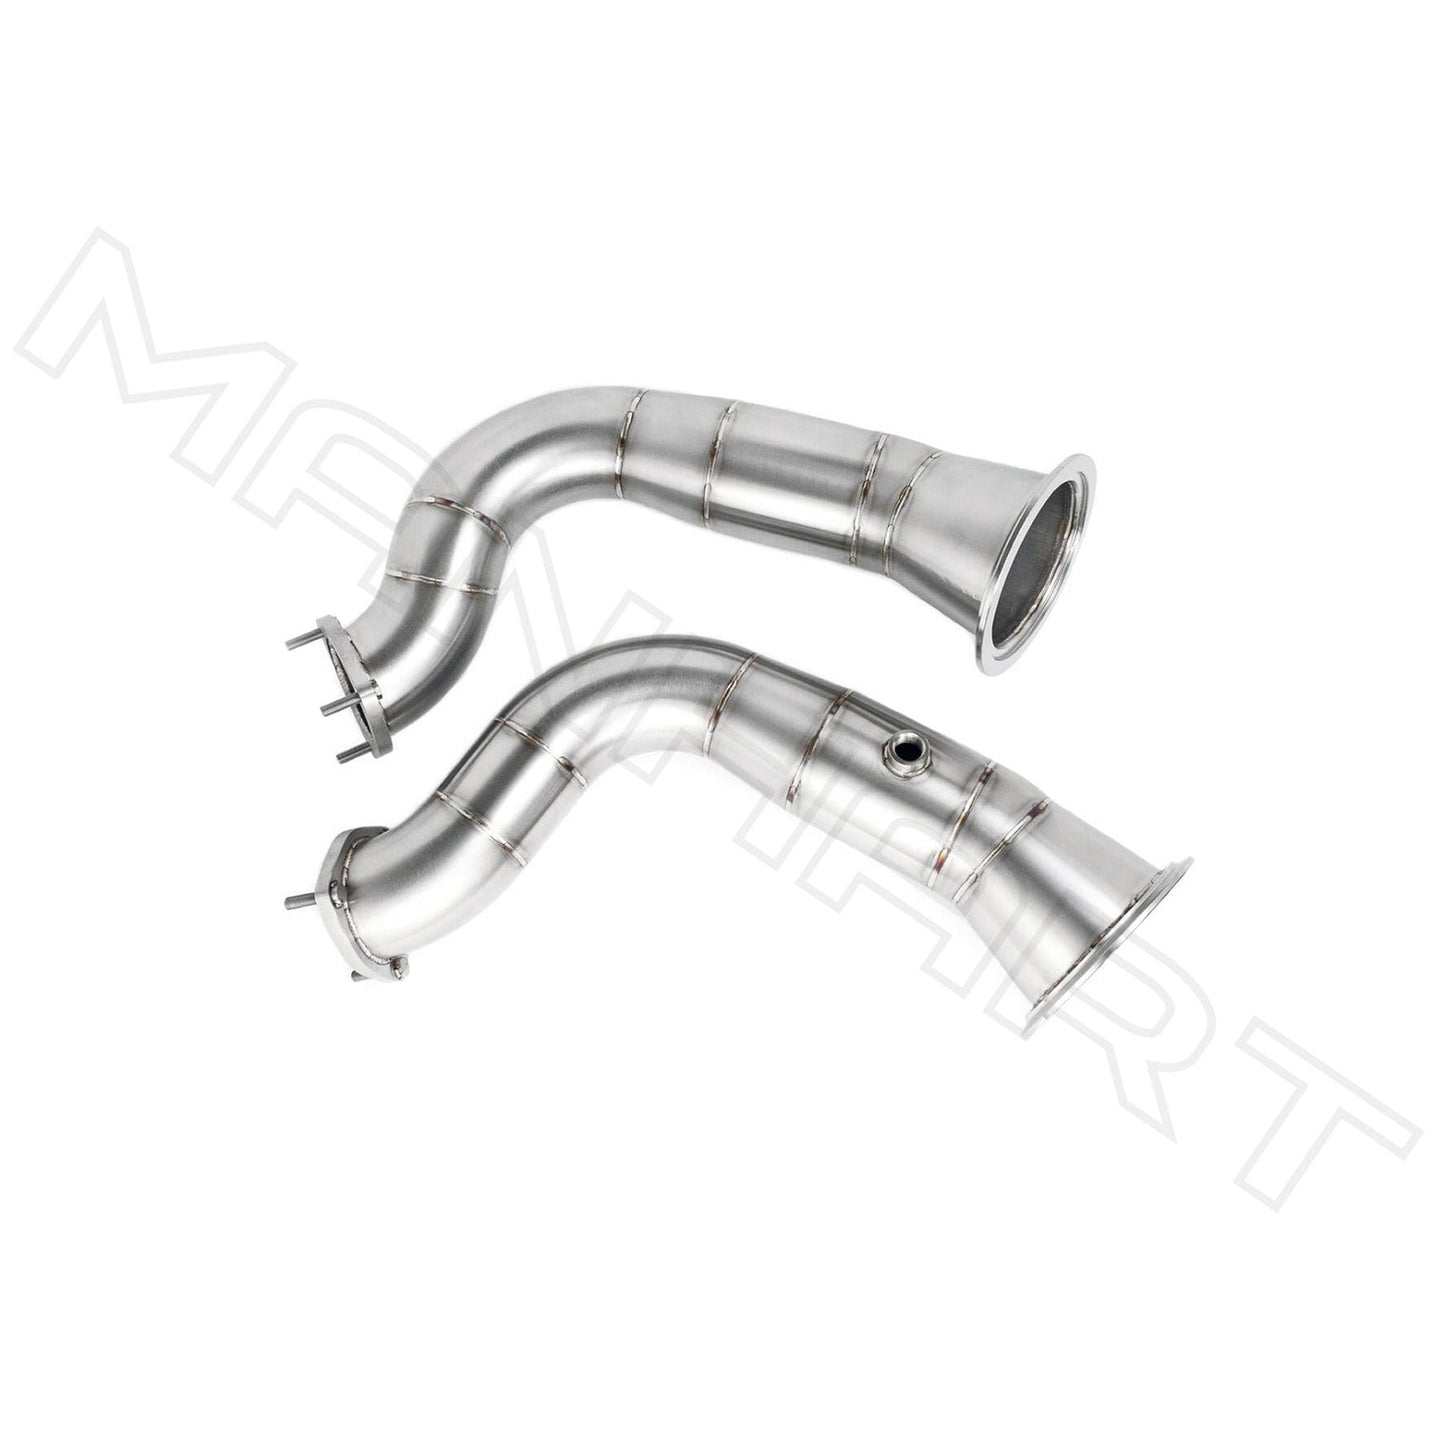 MANHART MH5LU3101 DOWNPIPES SPORT FOR LAMBORGHINI URUS WITH 300 CELLS HJS CATALYTIC CONVERTERS